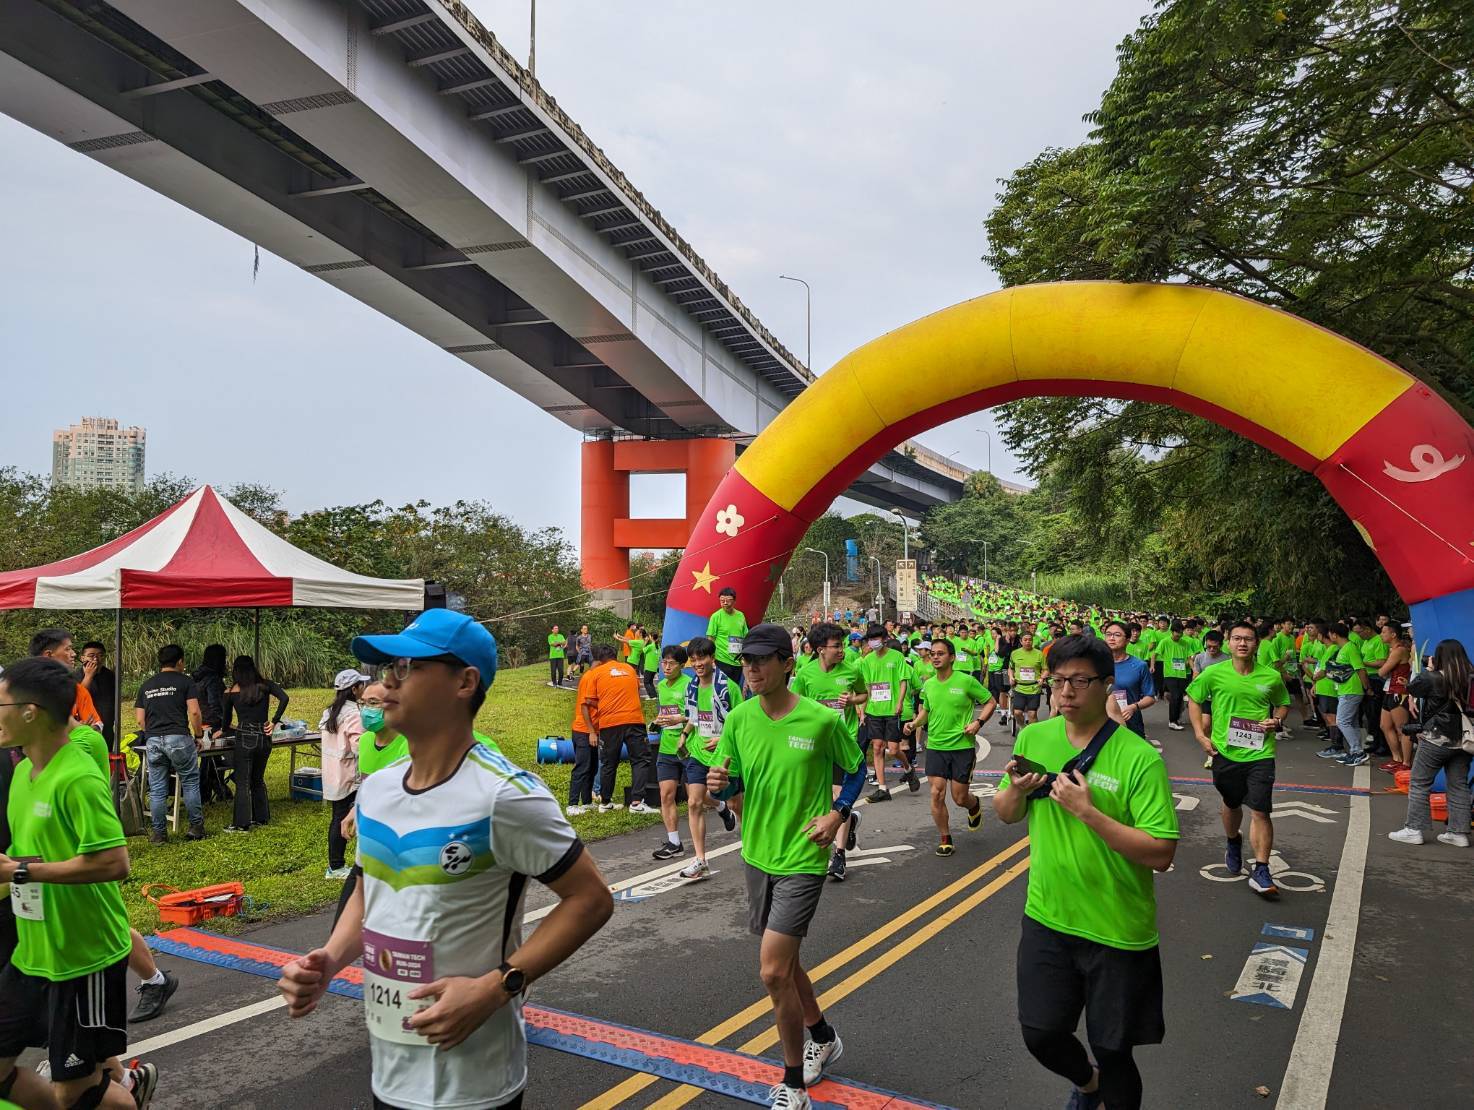 The Taiwan Tech’s Health Run event kicked off on March 16th, attracting approximately one thousand faculty, staff, students, and alumni who enthusiastically participated.